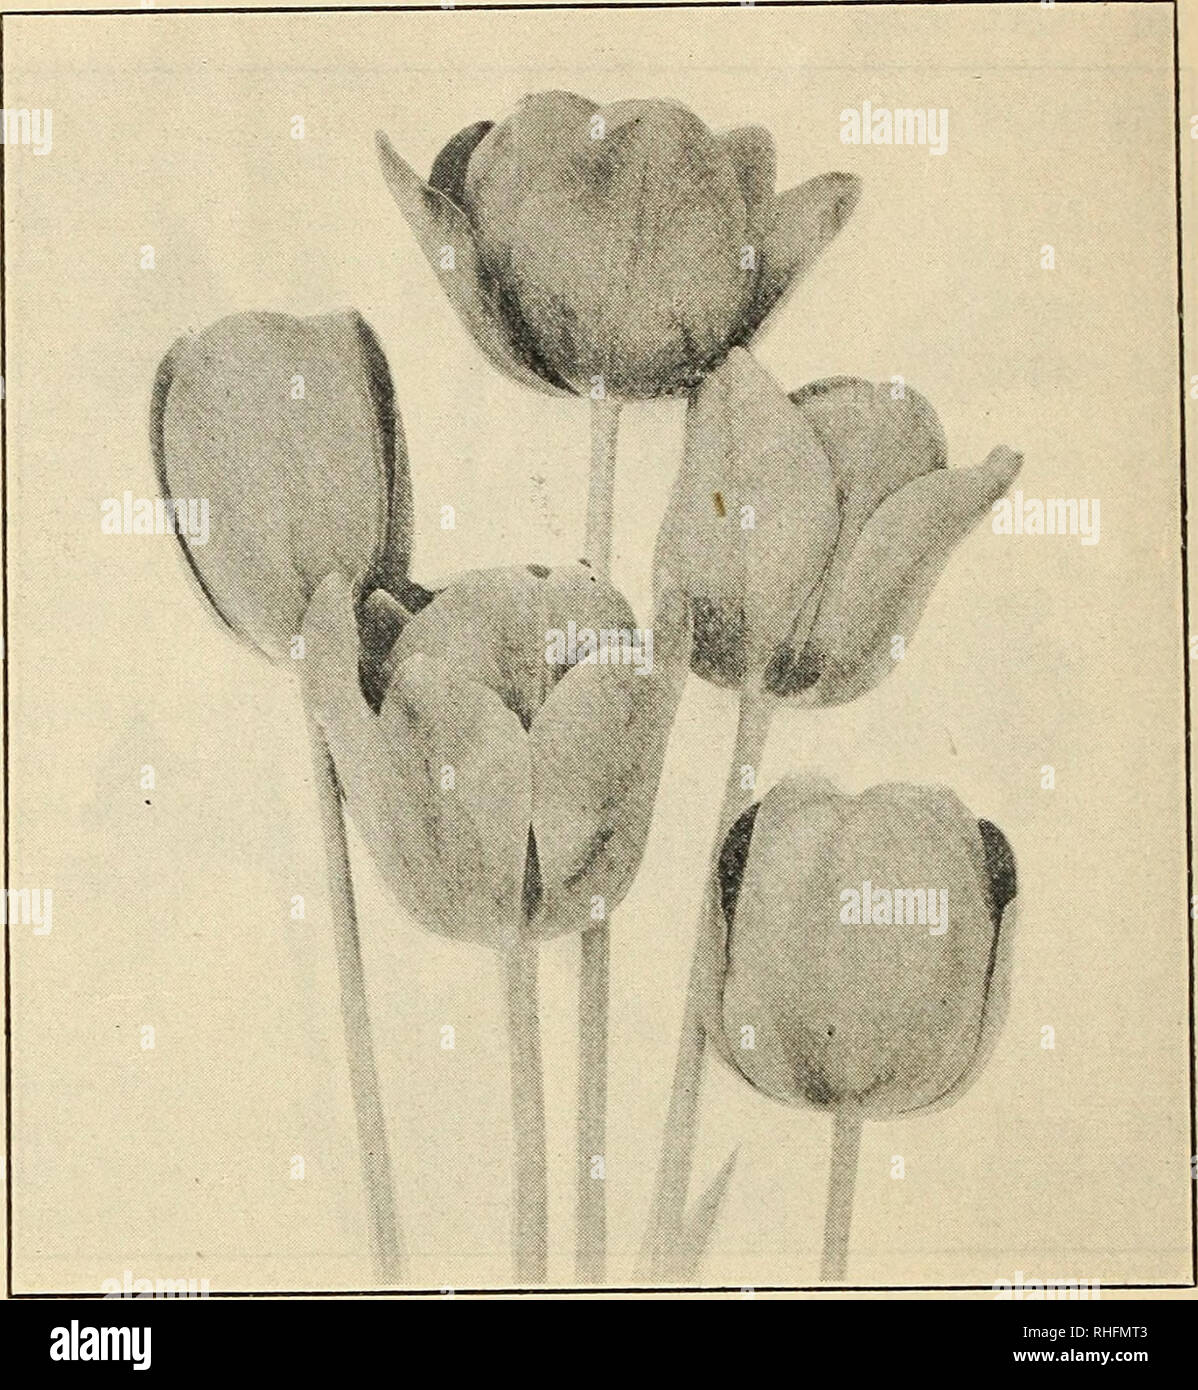 . Bolgiano's capitol city seeds : 1922. Nurseries (Horticulture) Catalogs; Bulbs (Plants) Catalogs; Vegetables Catalogs; Garden tools Catalogs; Seeds Catalogs. F. W. B0LQ1AN0 &amp; CO. WASHINGTON, D. C. SINGLE EARLY TULIPS Ready for Delivery late in September. Each Doz. 100 ARTUS, Dark Scarlet, large flower $0.05 $0.45 $2.75 CHRYSOLORA, Large Pure Yellow 05 .50 3.25 COTTAGE MAID, Dark Rose shaded with White 05 .50 3.25 DUCHESS DE PARMA, Brownish Red with large light orange border 05 .45 3.00 KEIZERKROON, Bright Red with broad golden yellow border 05 .45 2.75 LA REINE (Queen Victoria), White, s Stock Photo